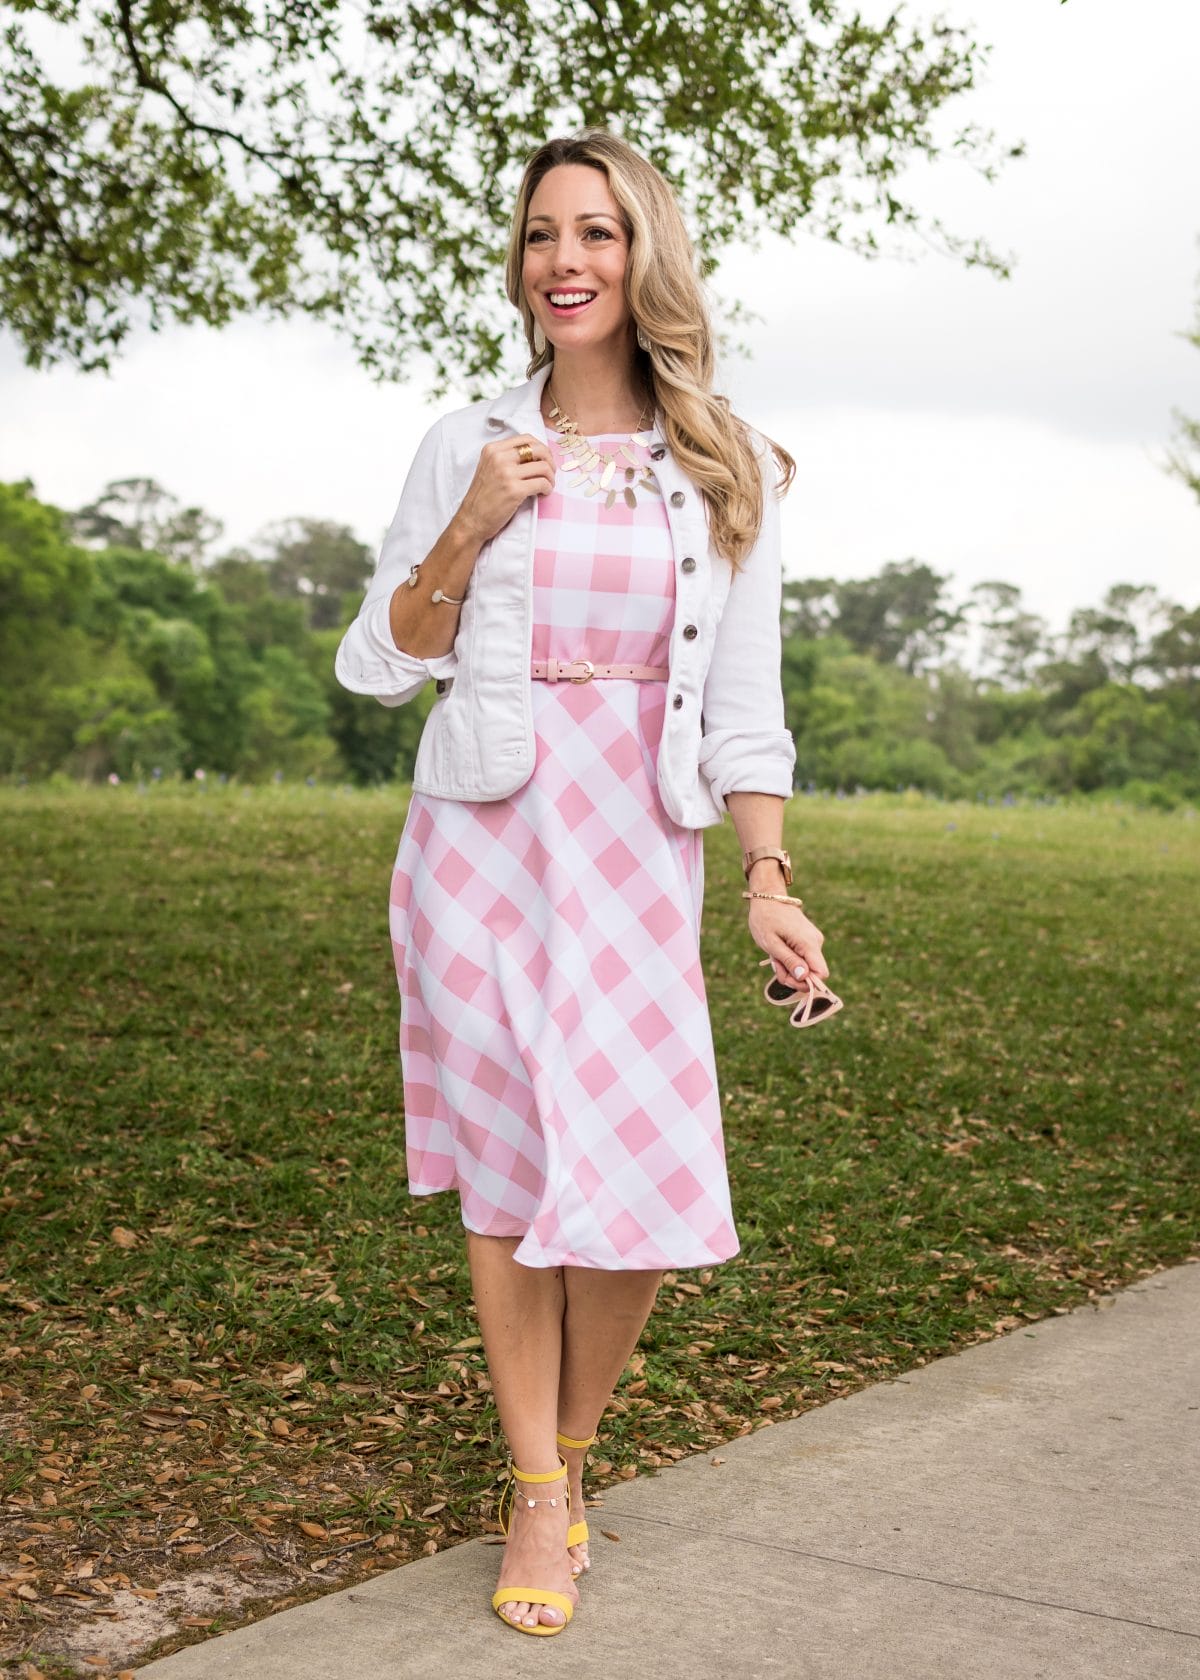 Spring fashion - pink and white gingham dress 11